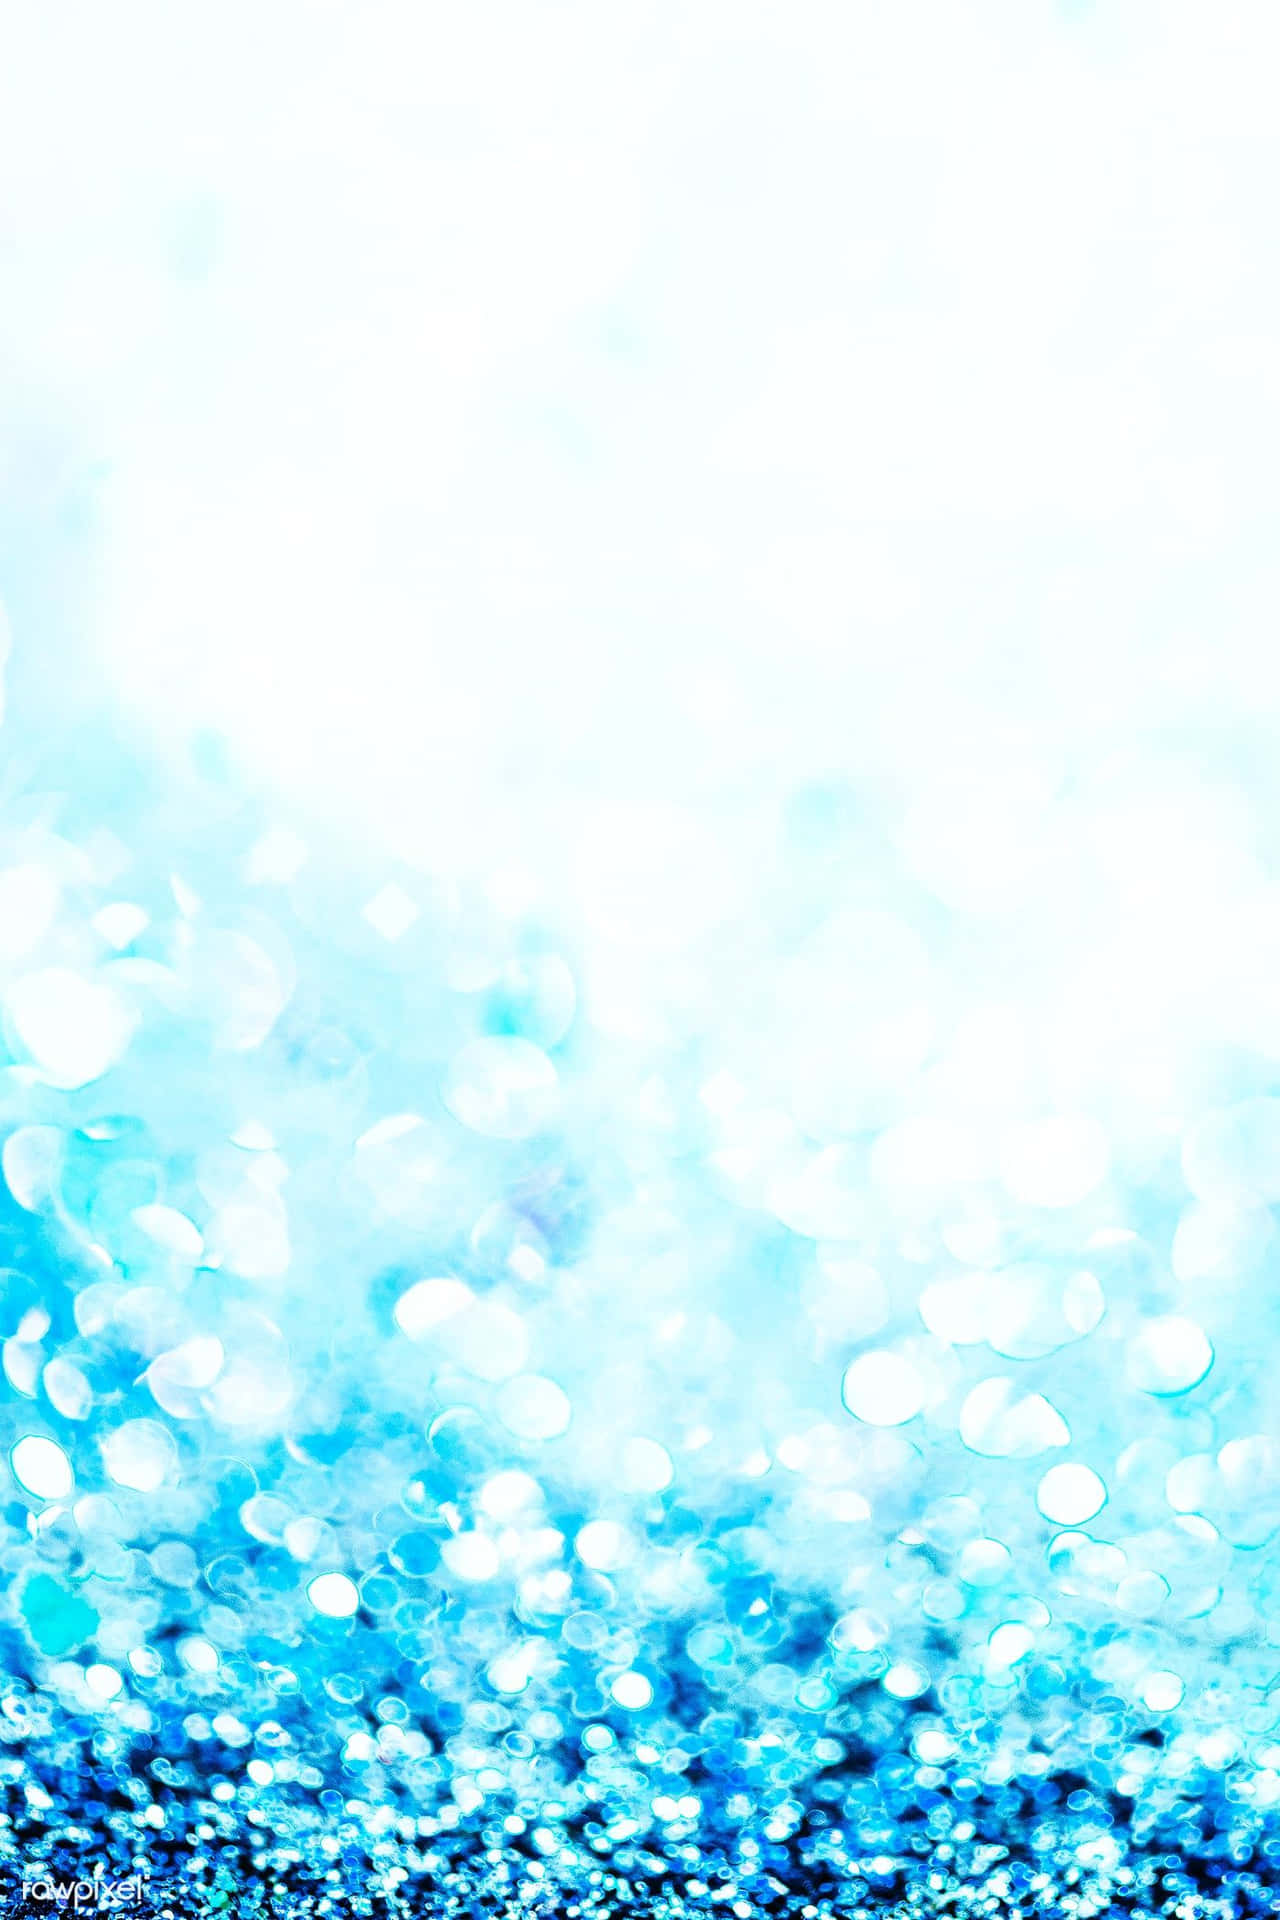 Teal And Sparkly Blue Background